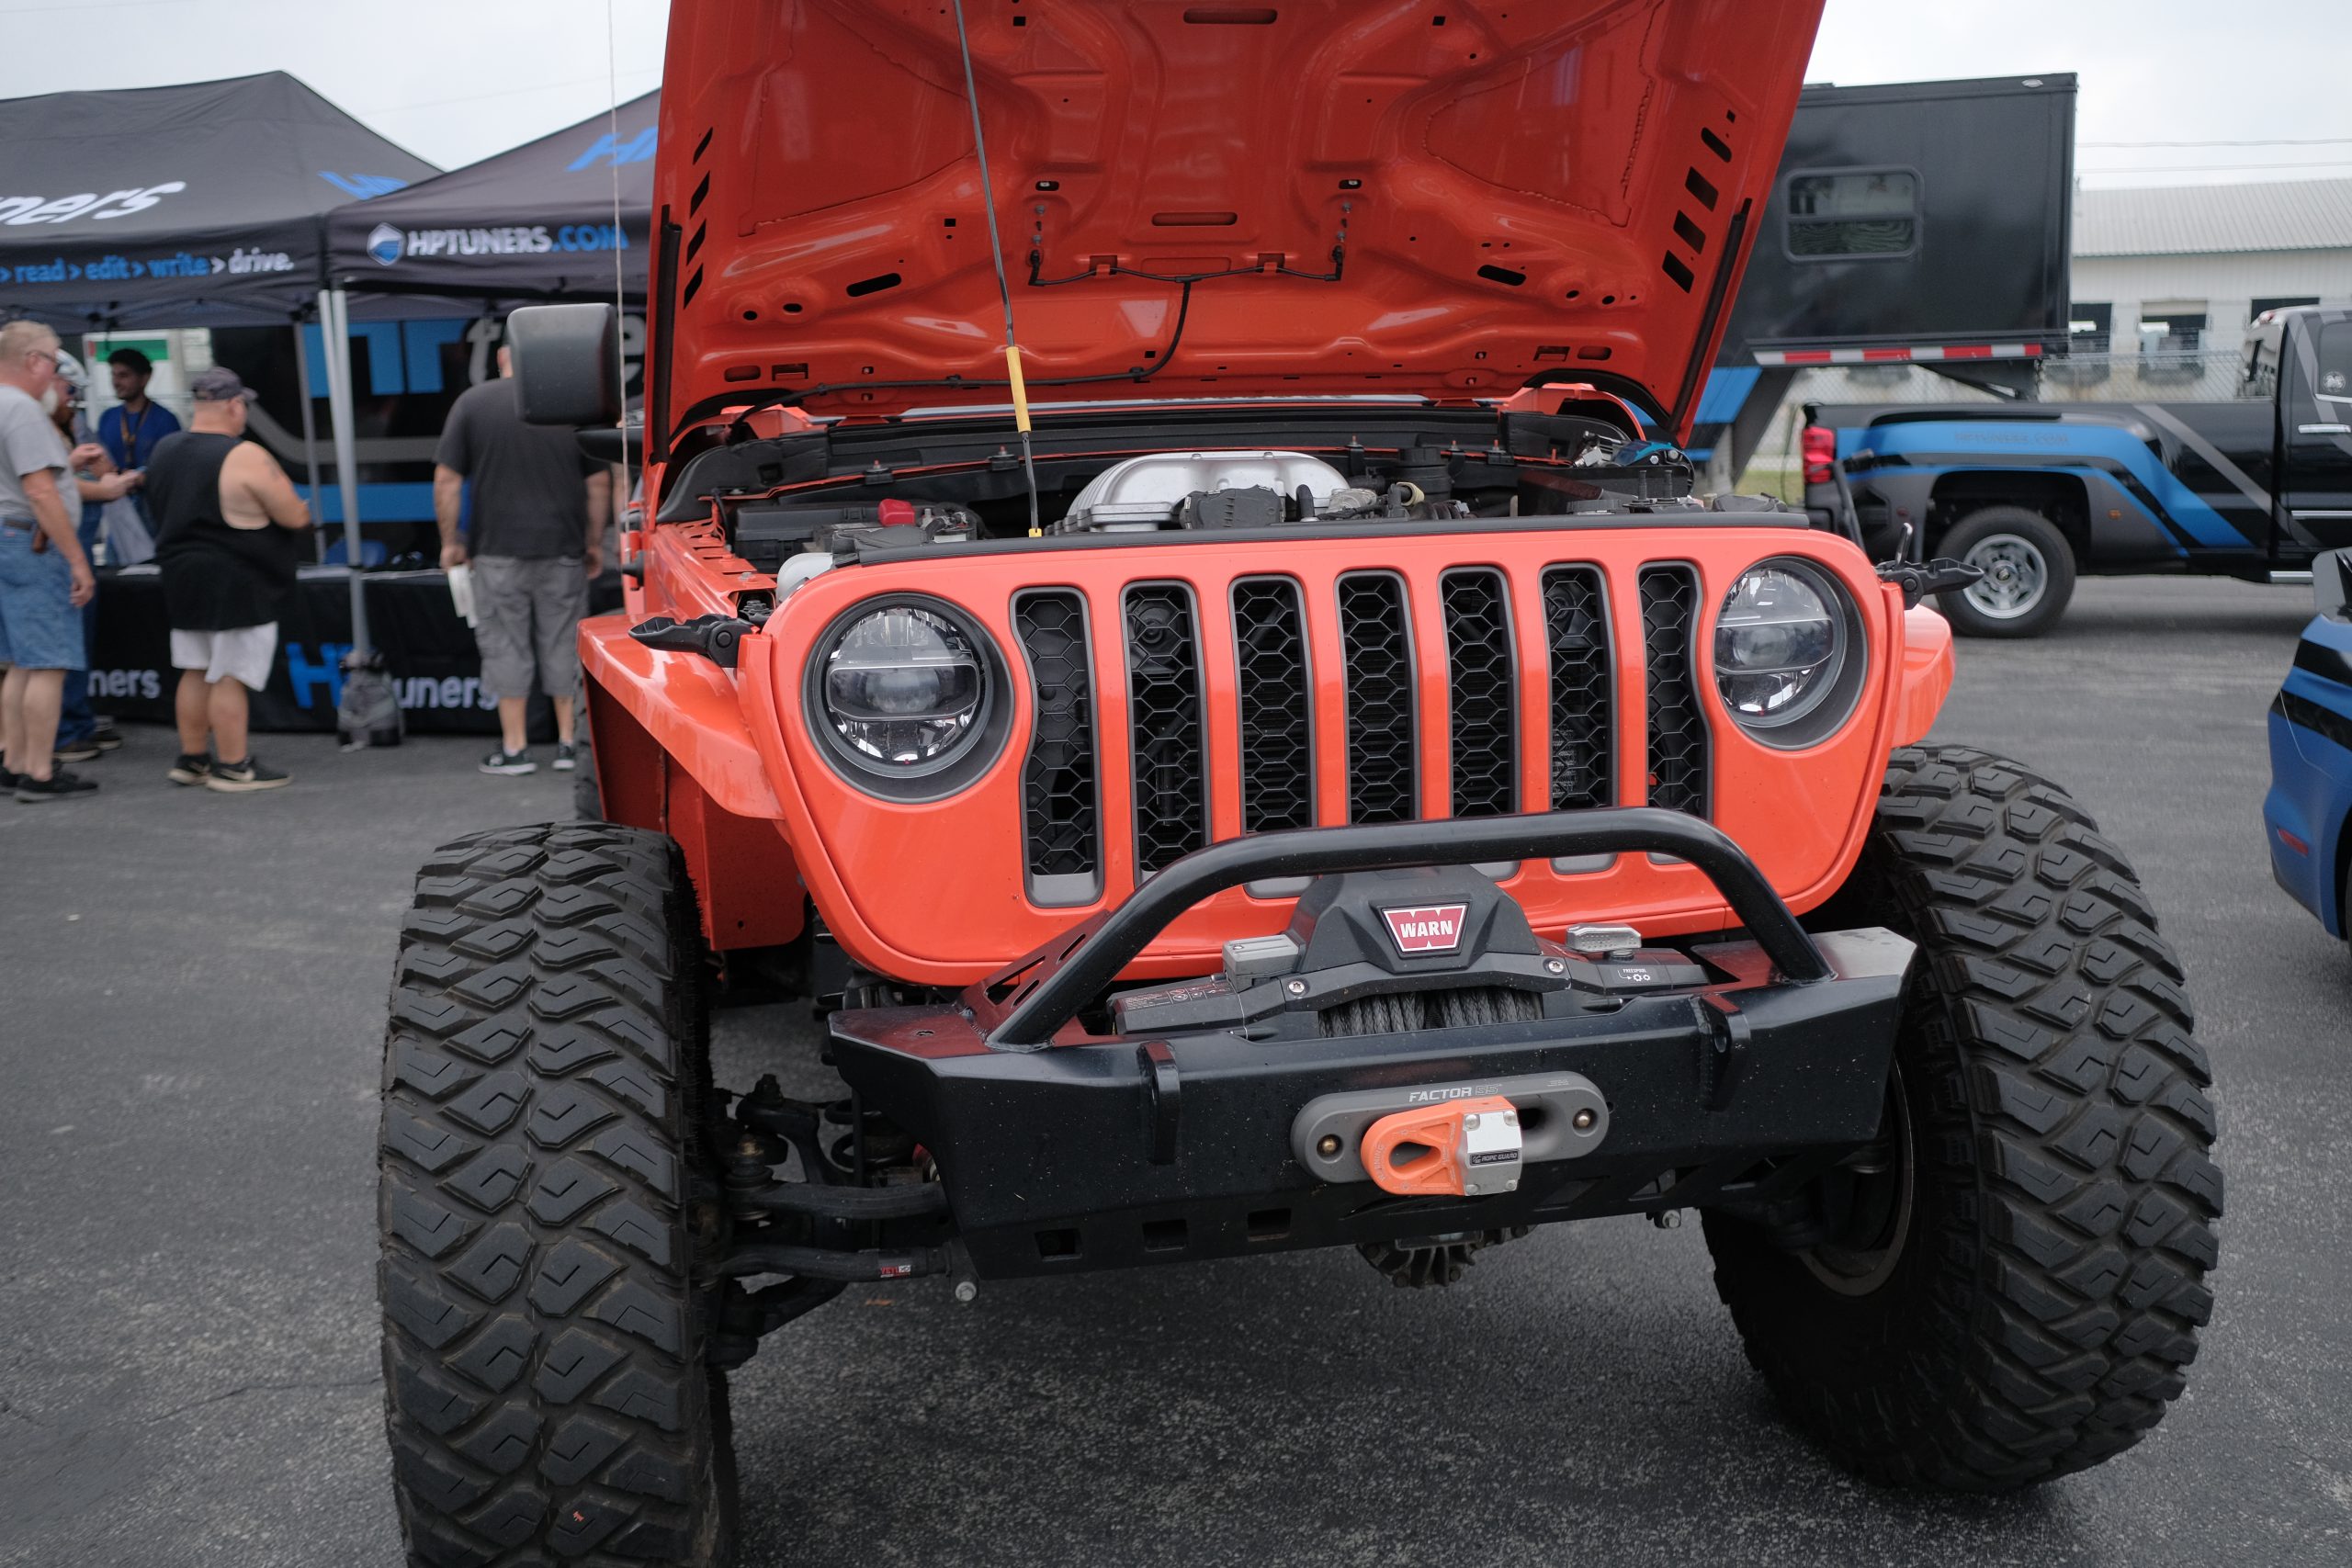 Meet the Cone-Killing Jeep From HOT ROD Power Tour 2017